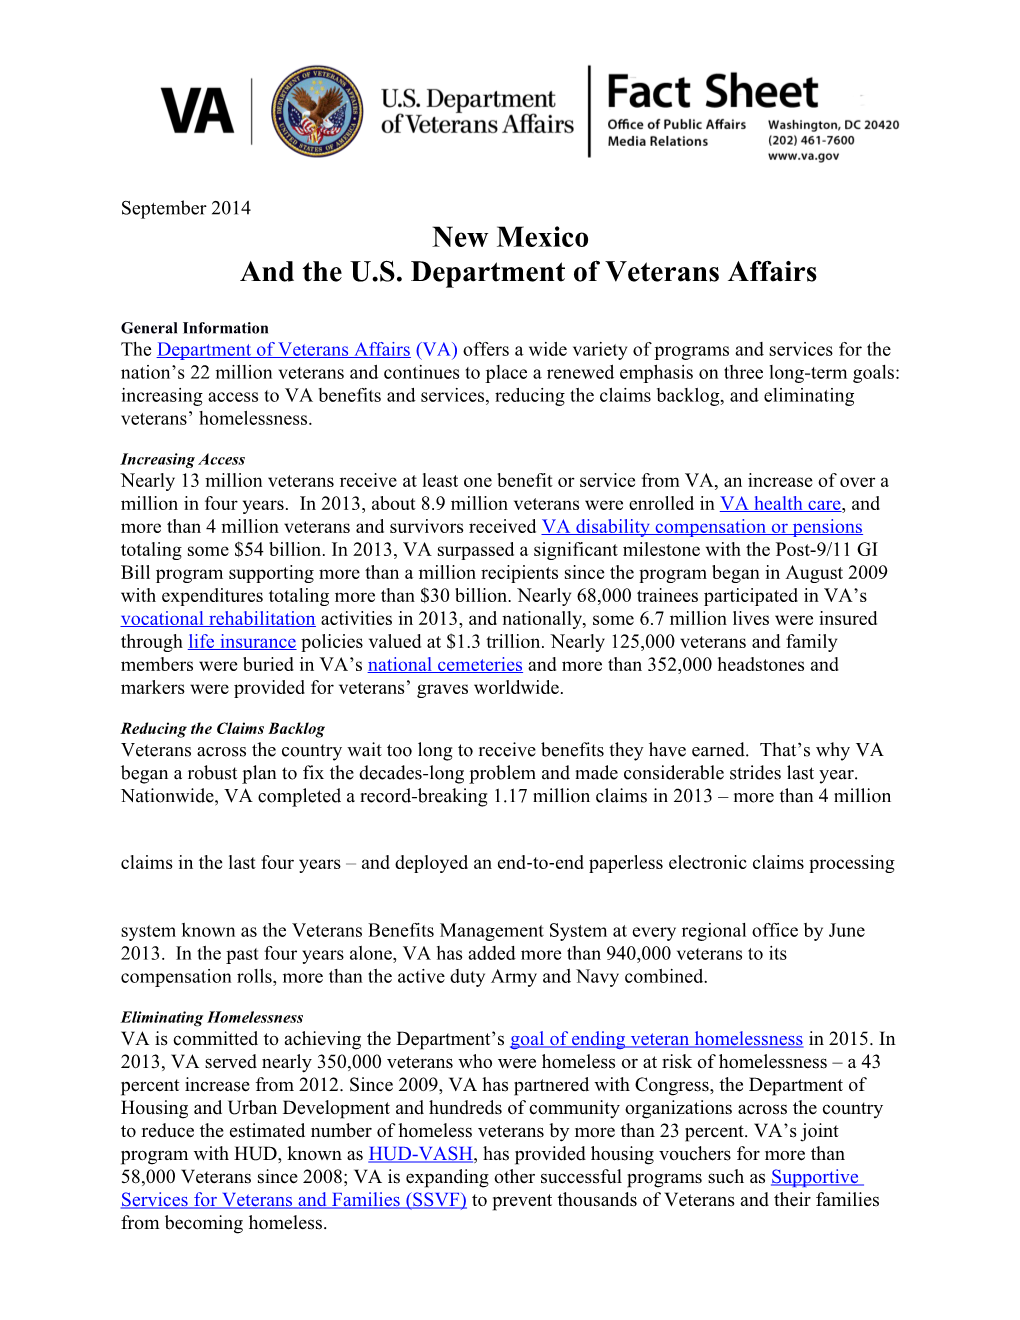 New Mexicoand the U.S. Department of Veterans Affairs